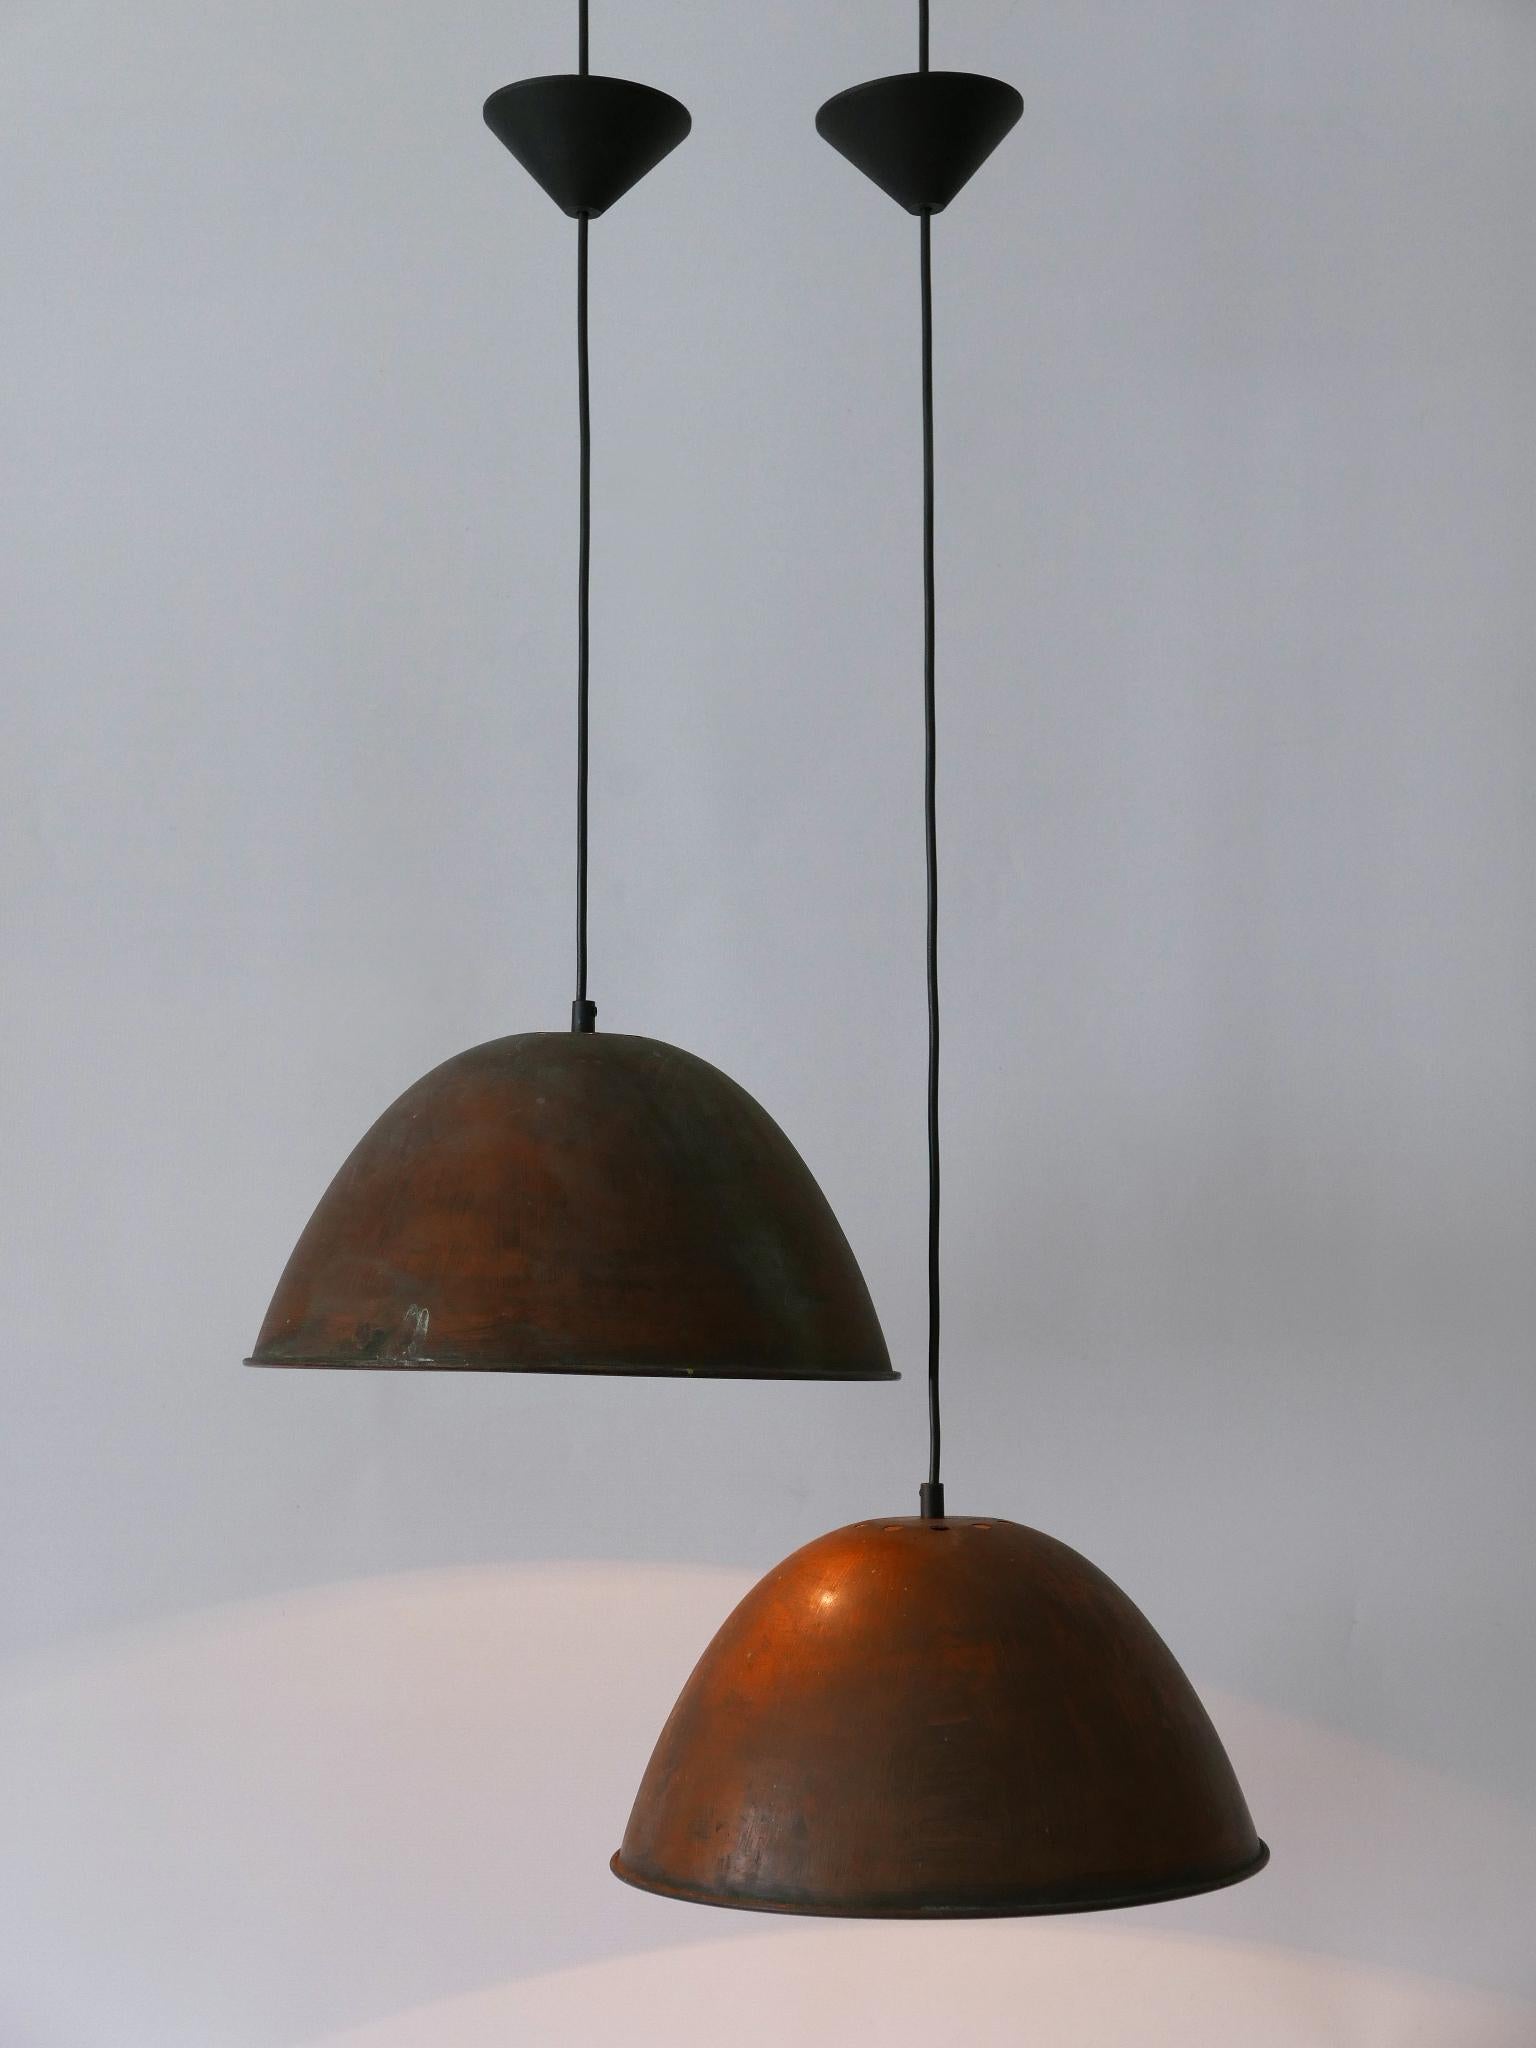 Set of Two Mid-Century Modern Copper Pendant Lamps or Hanging Lights 1950s For Sale 1